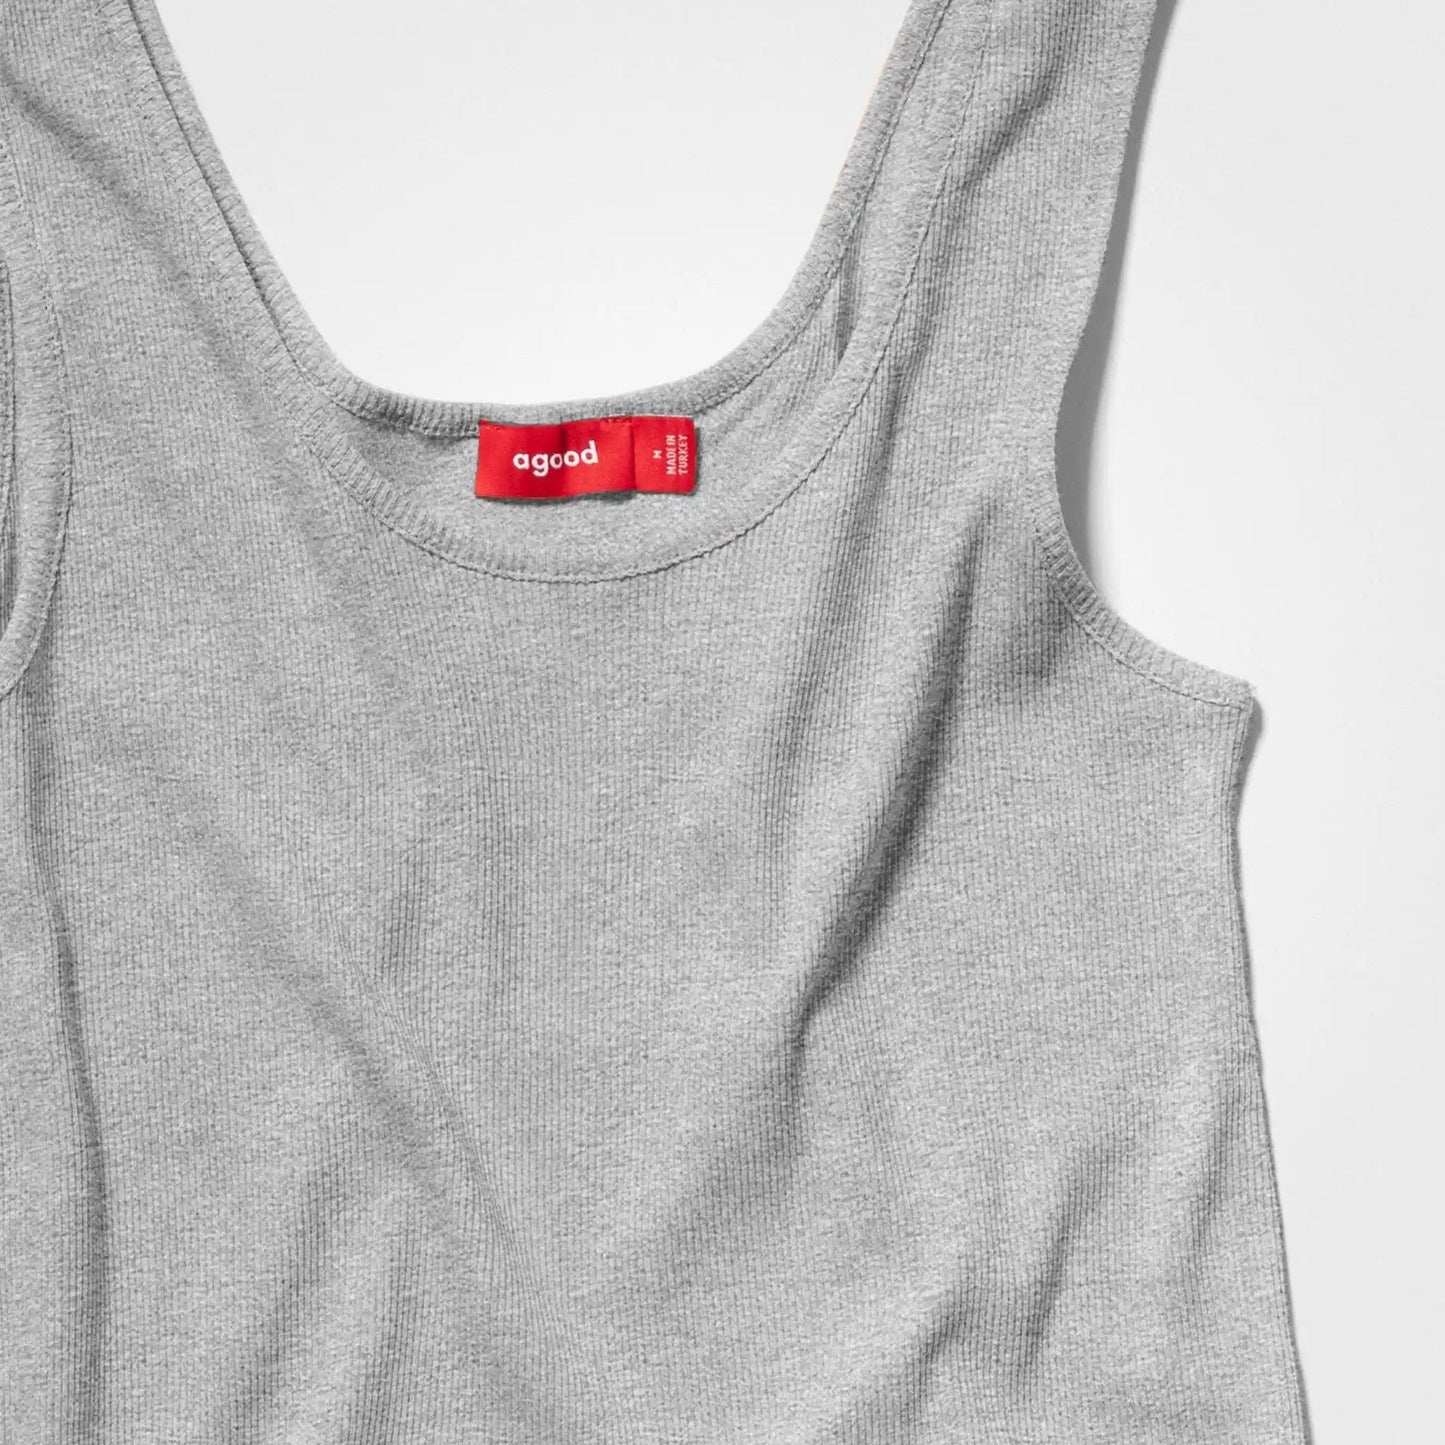 Women’s Recycled Cotton Tank Top, Heather Grey